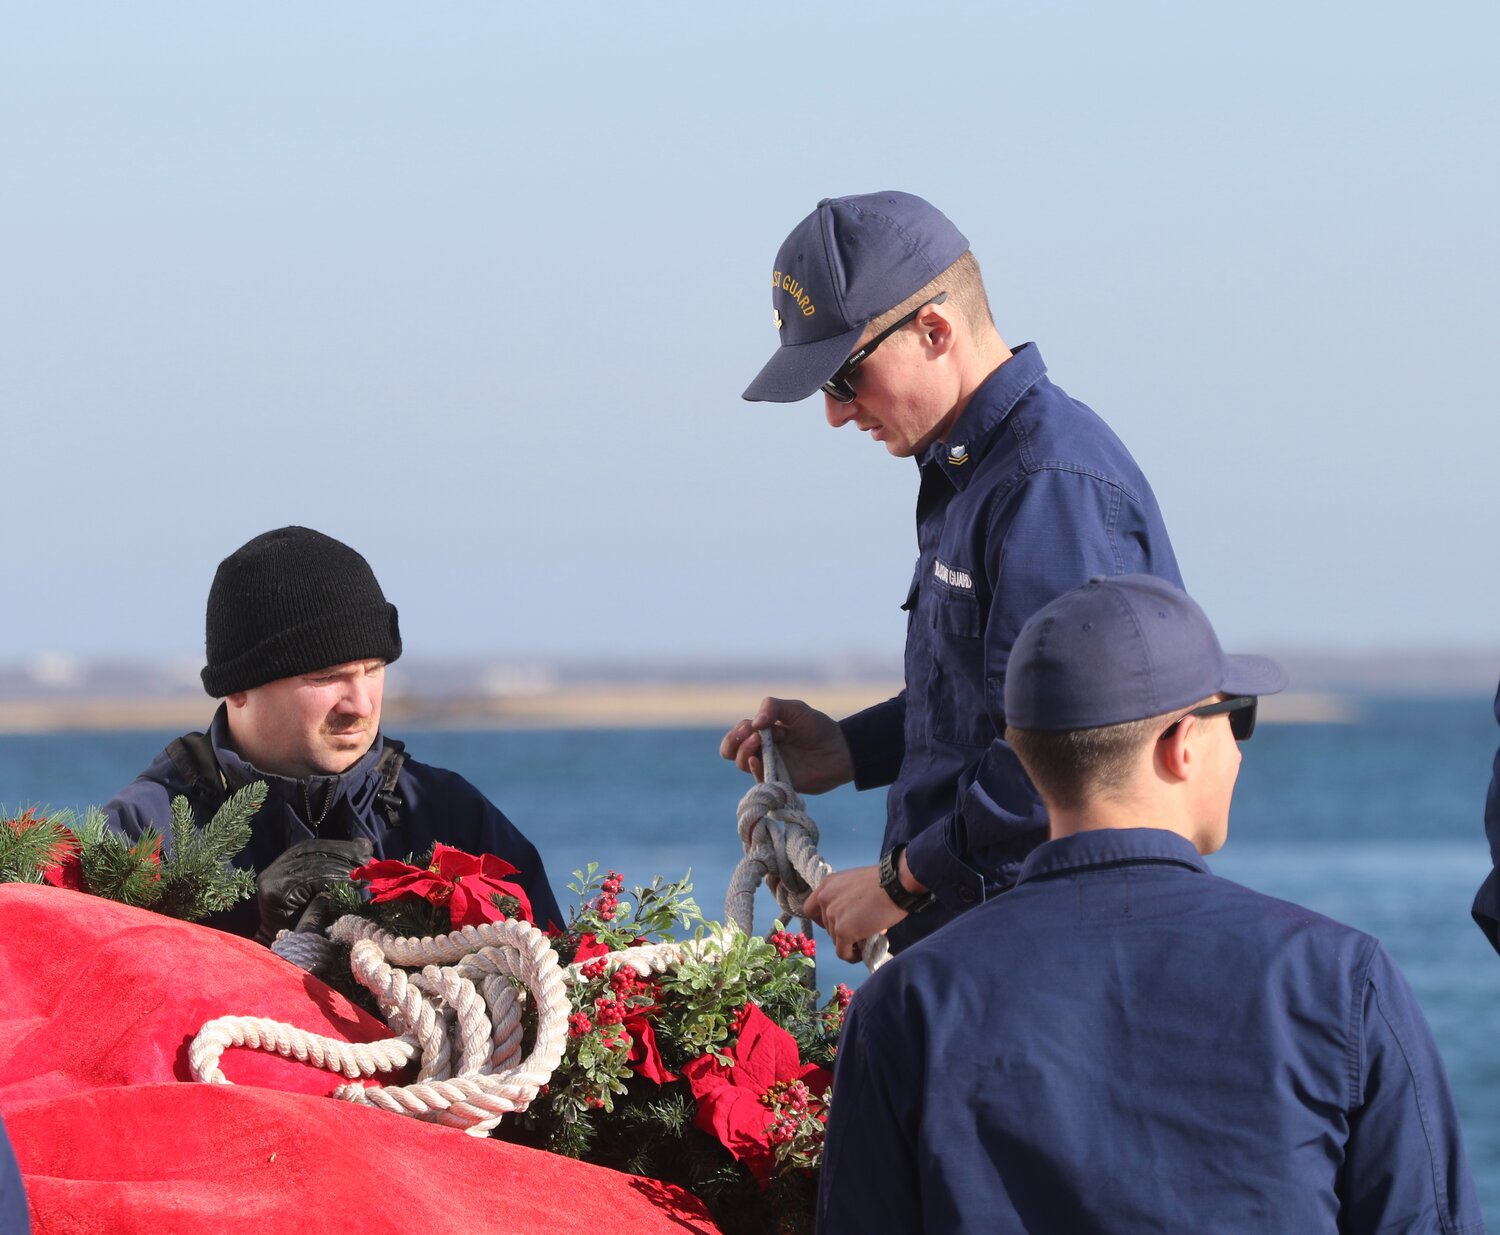 Members of U.S. Coast Guard Station Brant Point hung the wreath on Brant Point Light Thursday afternoon.